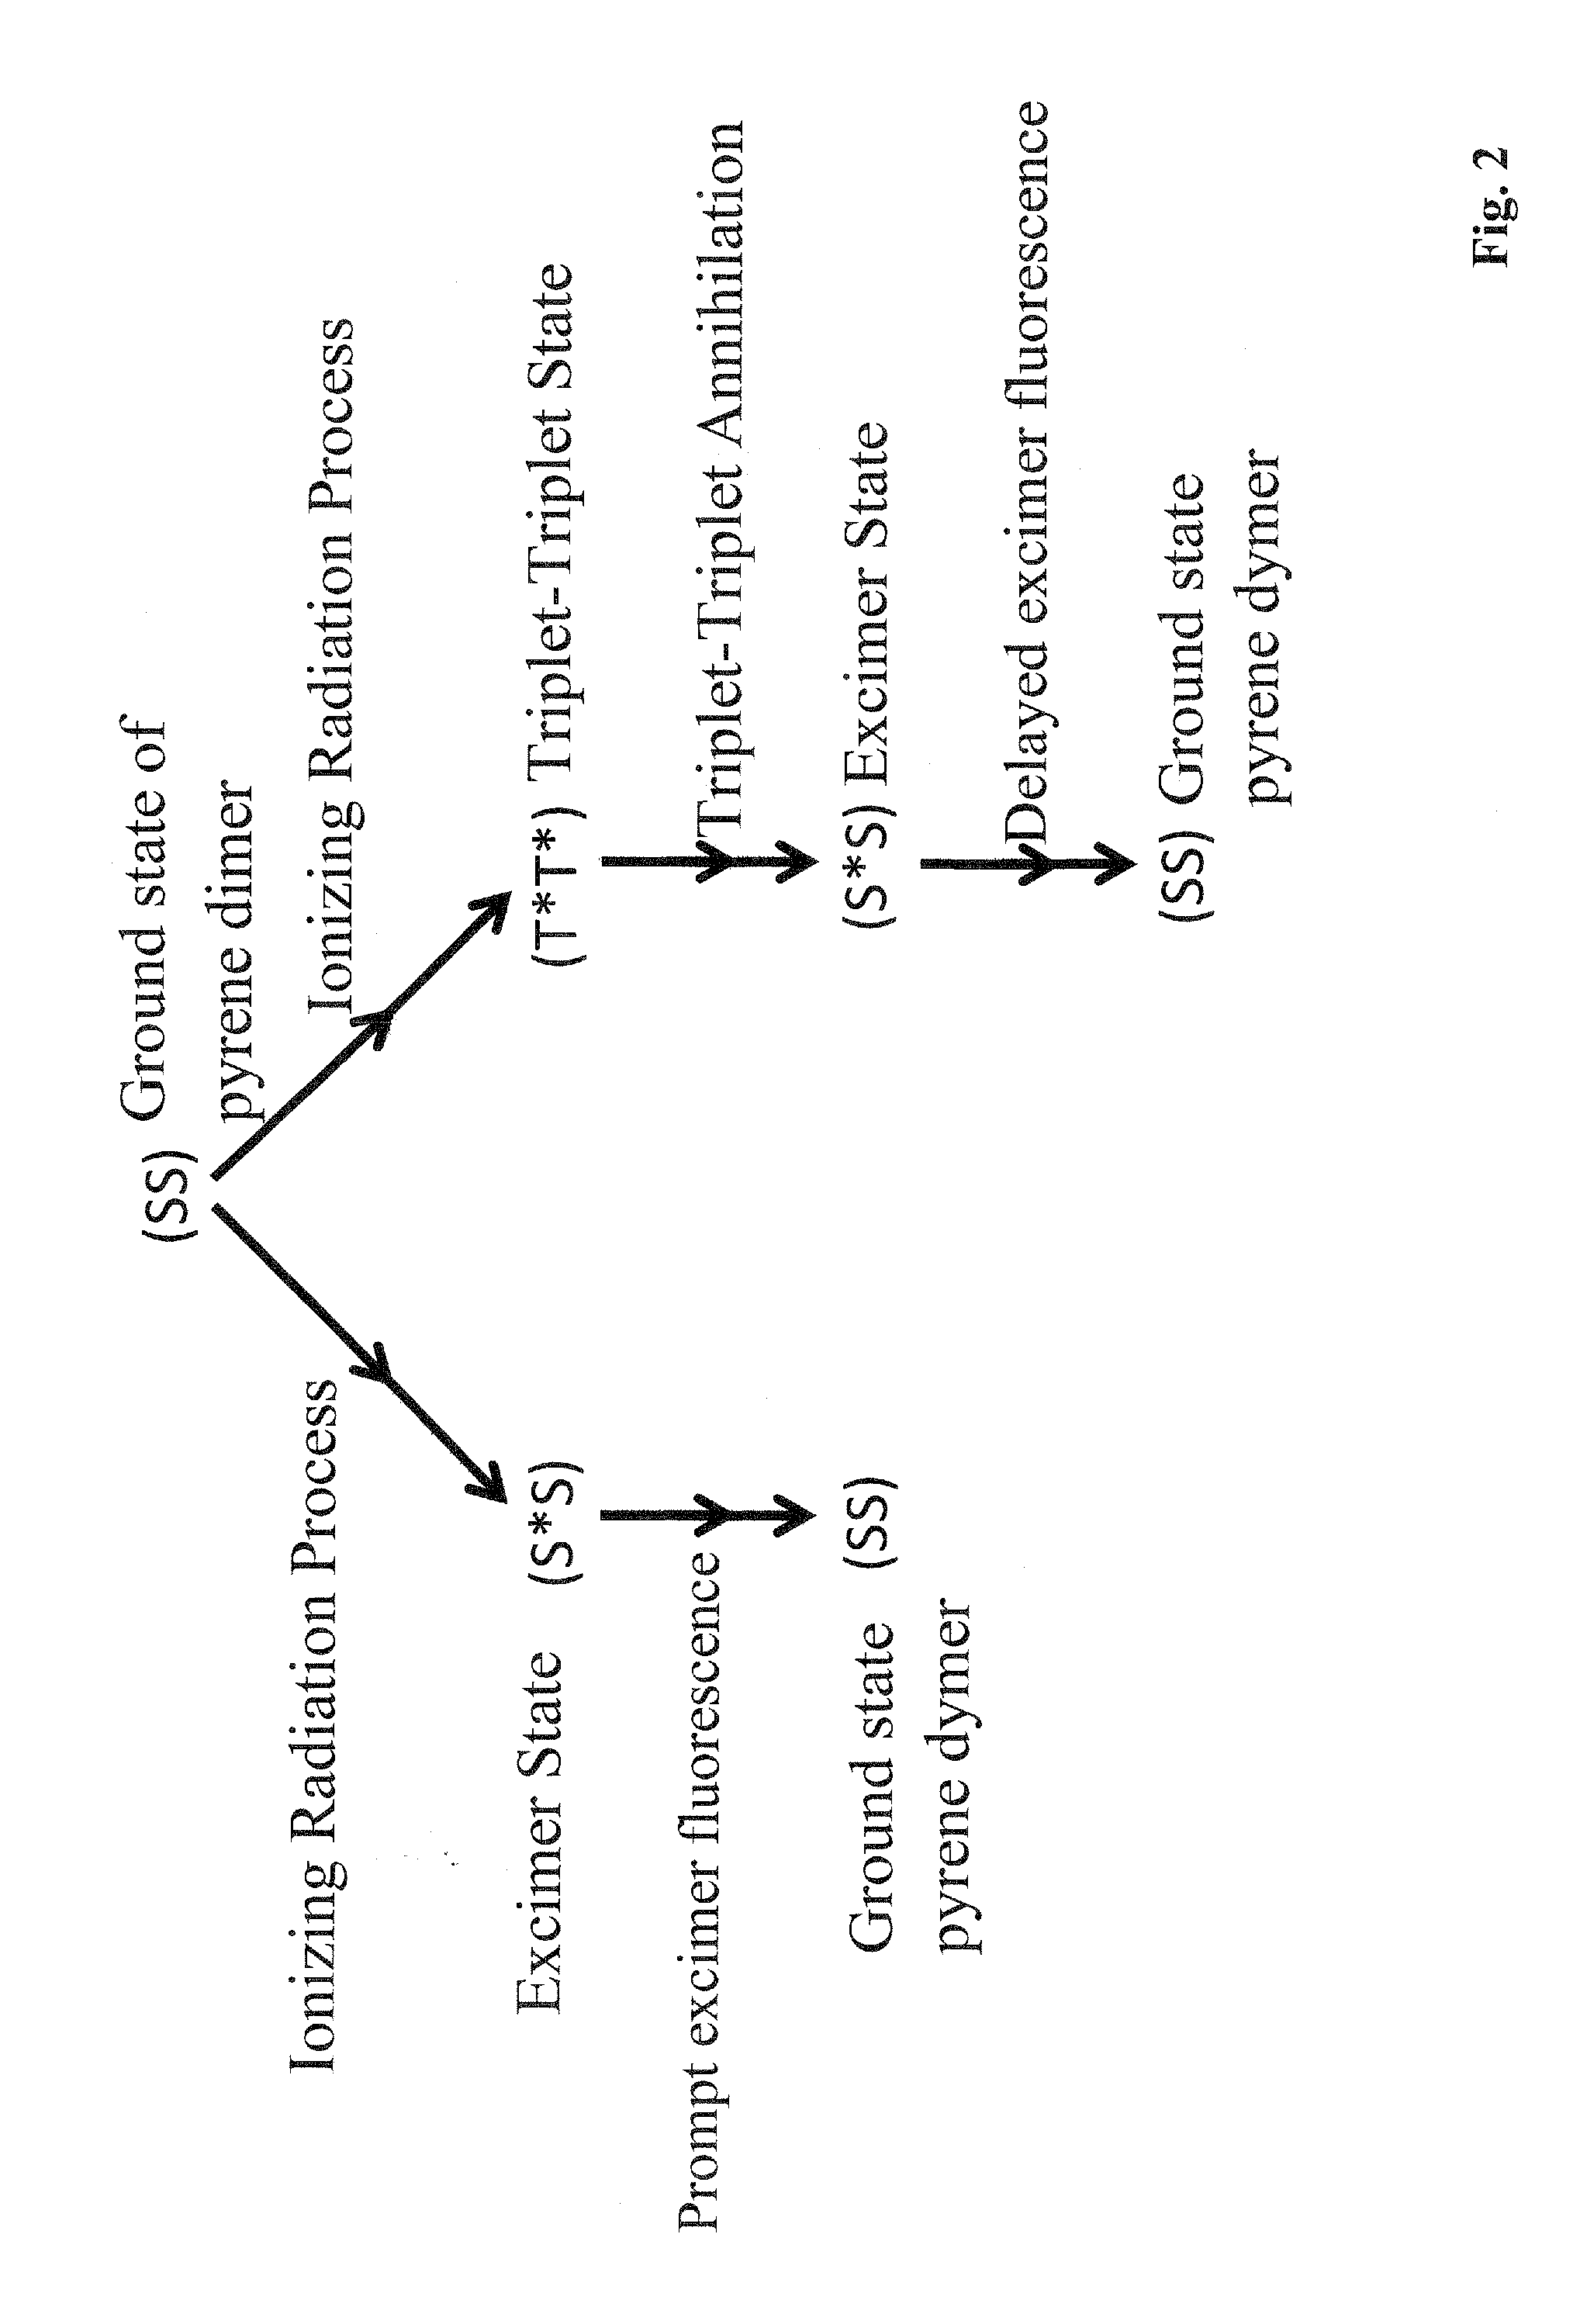 Materials, method, and apparatus for detecting neutrons and ionizing radiation